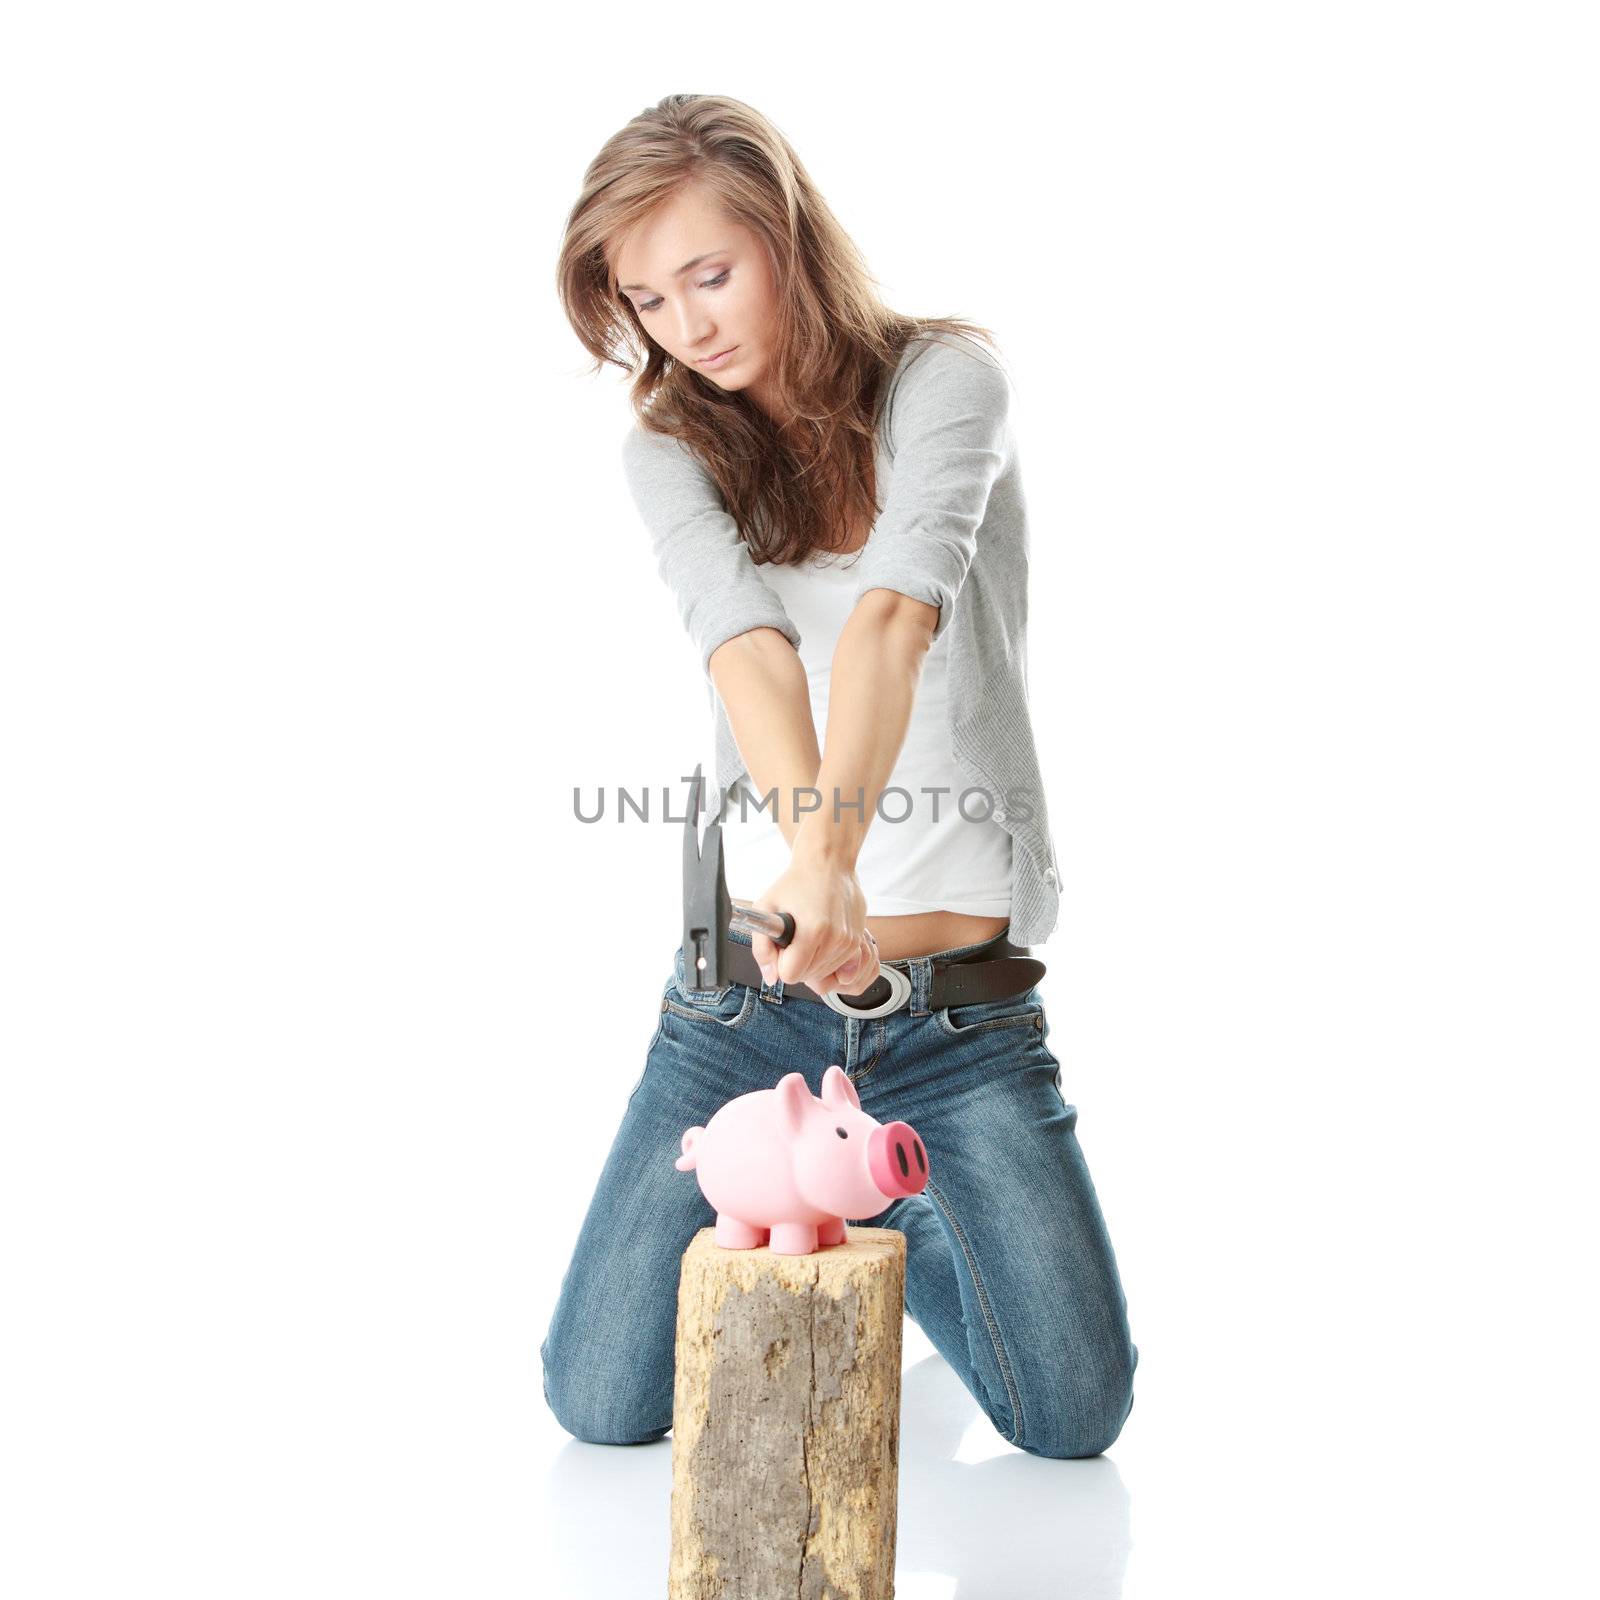 Young woman with hammer about to smash piggy bank to get at corporate savings